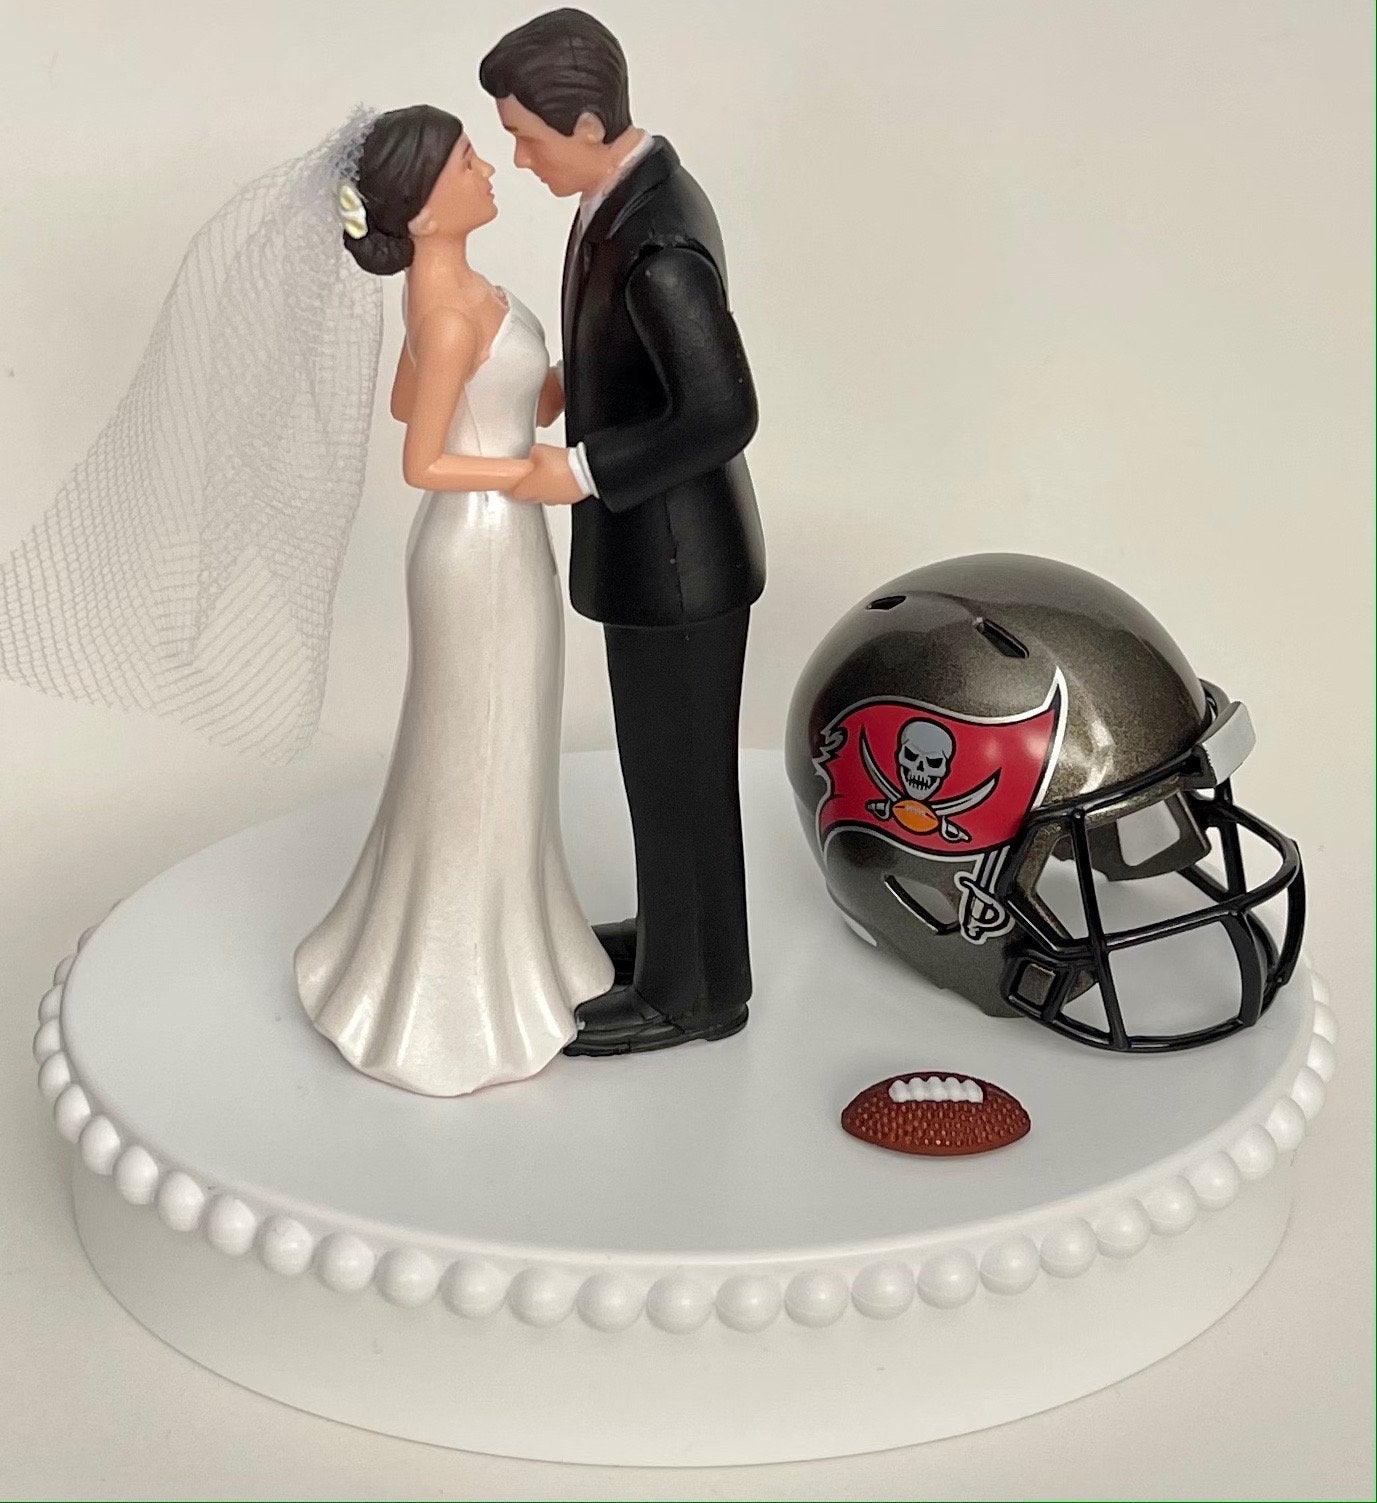 Wedding Cake Topper Tampa Bay Buccaneers Football Themed Pretty Short-Haired Bride Groom Sports Fan Unique Reception Bridal Shower Gift Idea